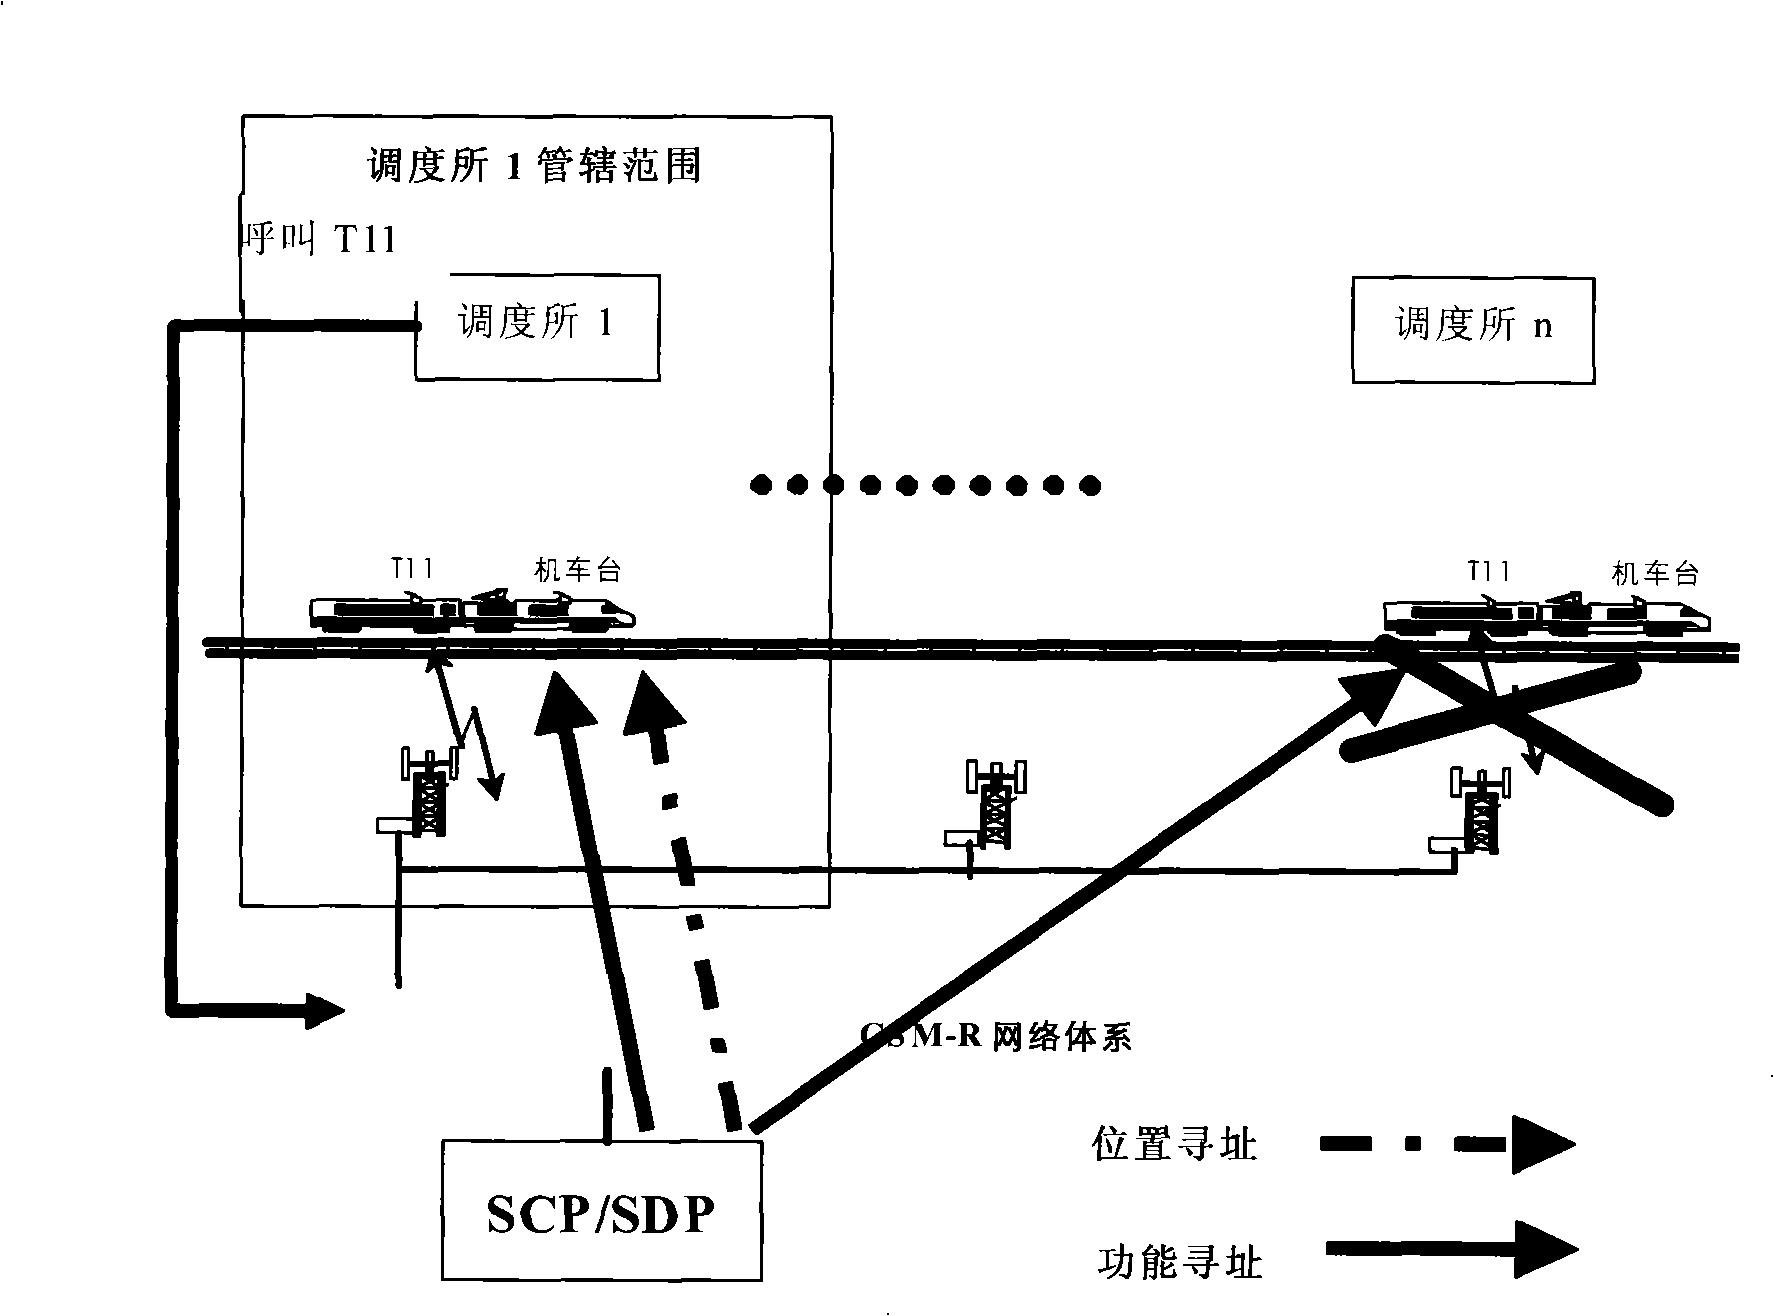 Method for resolving non uniqueness train number based on intelligent network position address